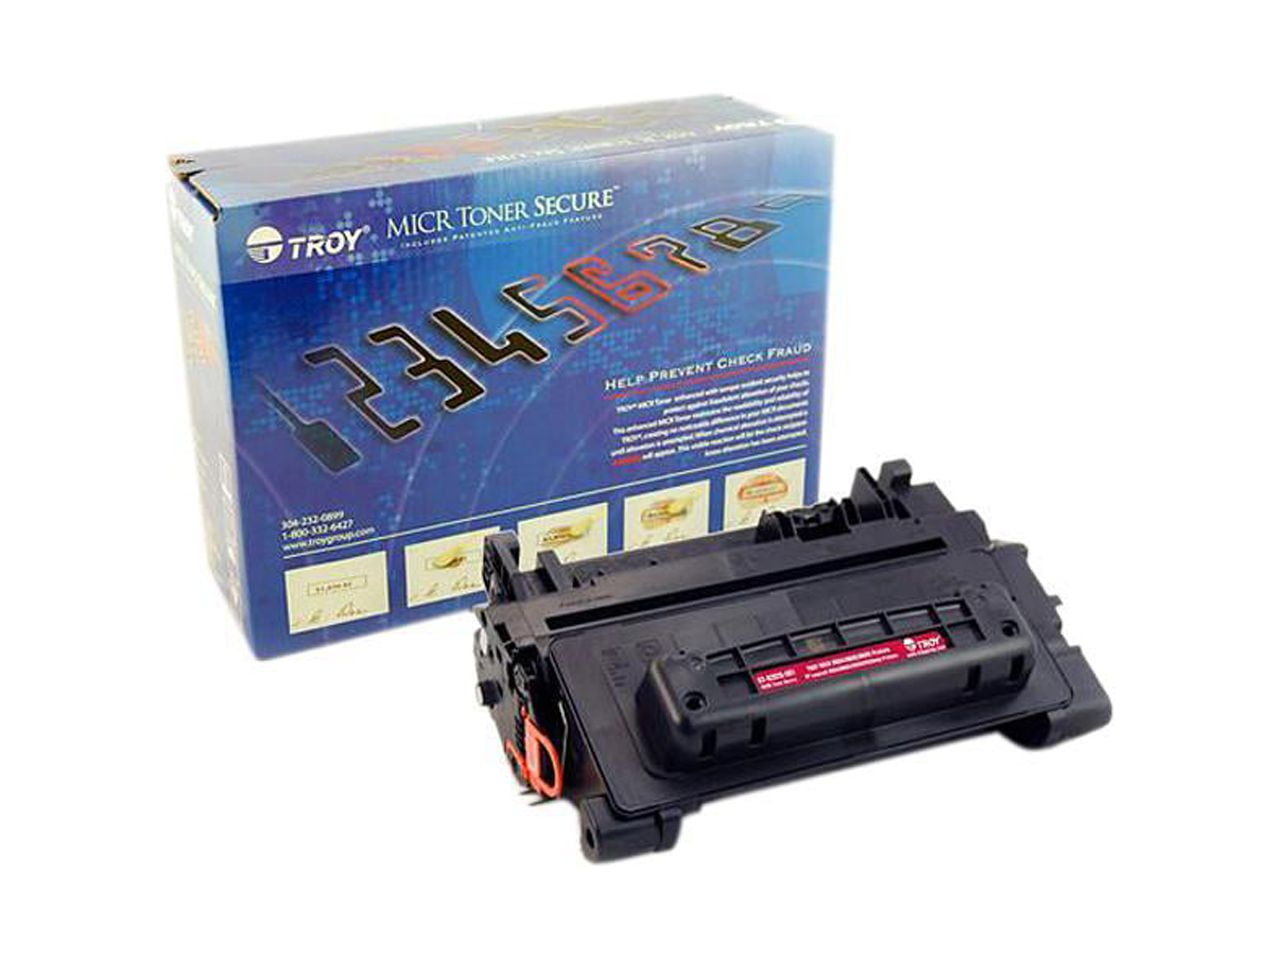 TROY GROUP TROY MICR TONER CARTRIDGE FOR USE WITH HP 604/605/606